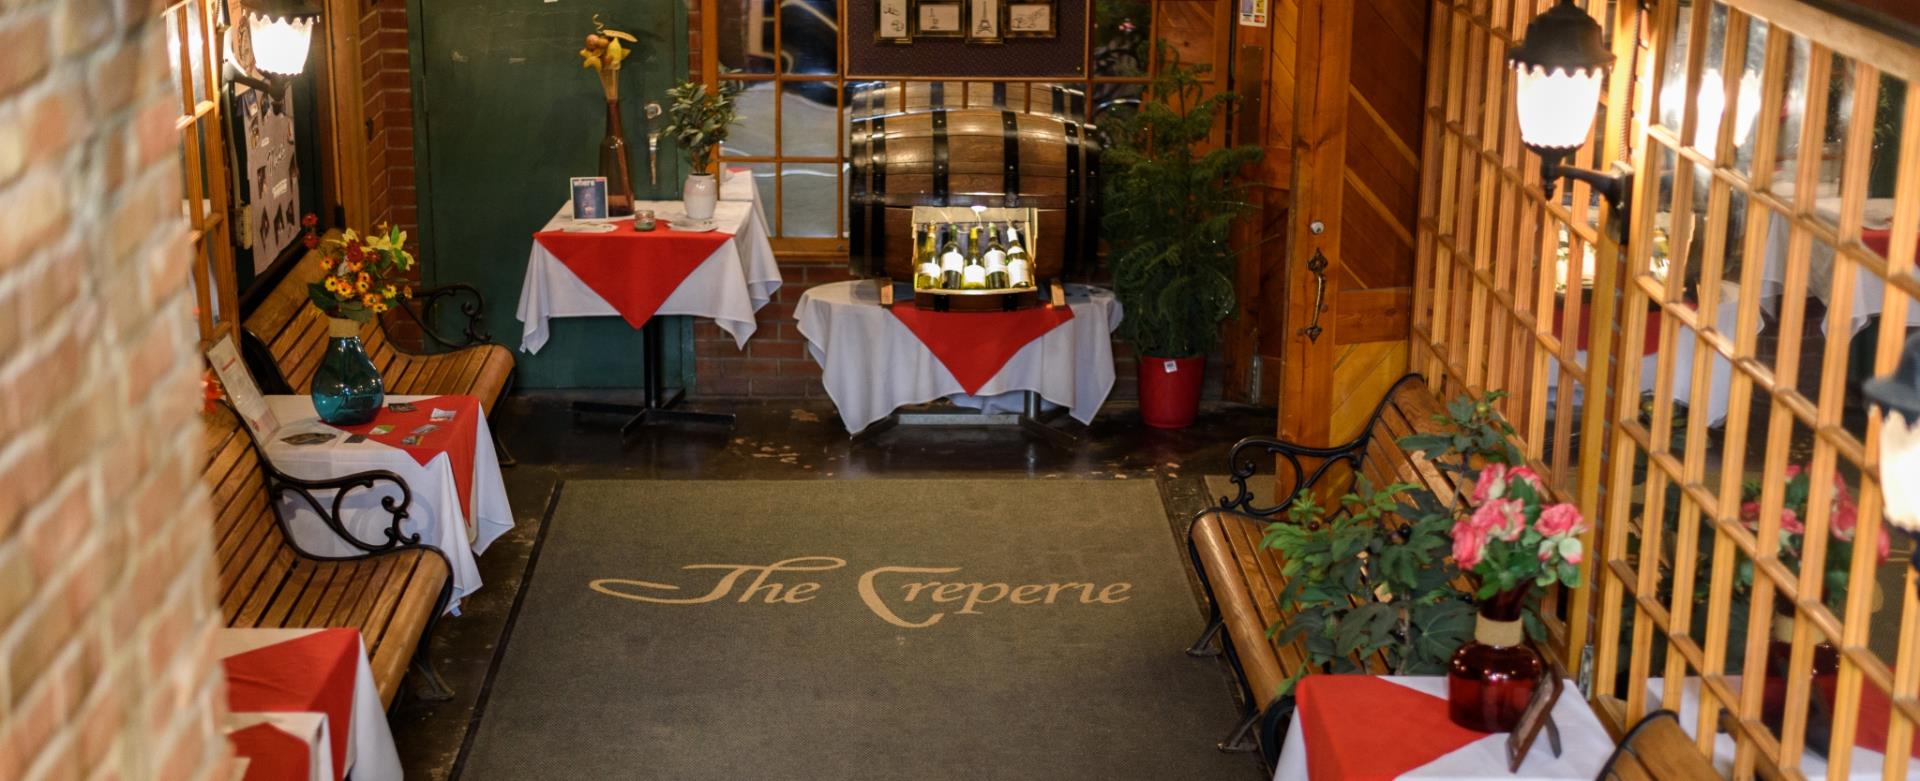 The Creperie Restaurant - Picture